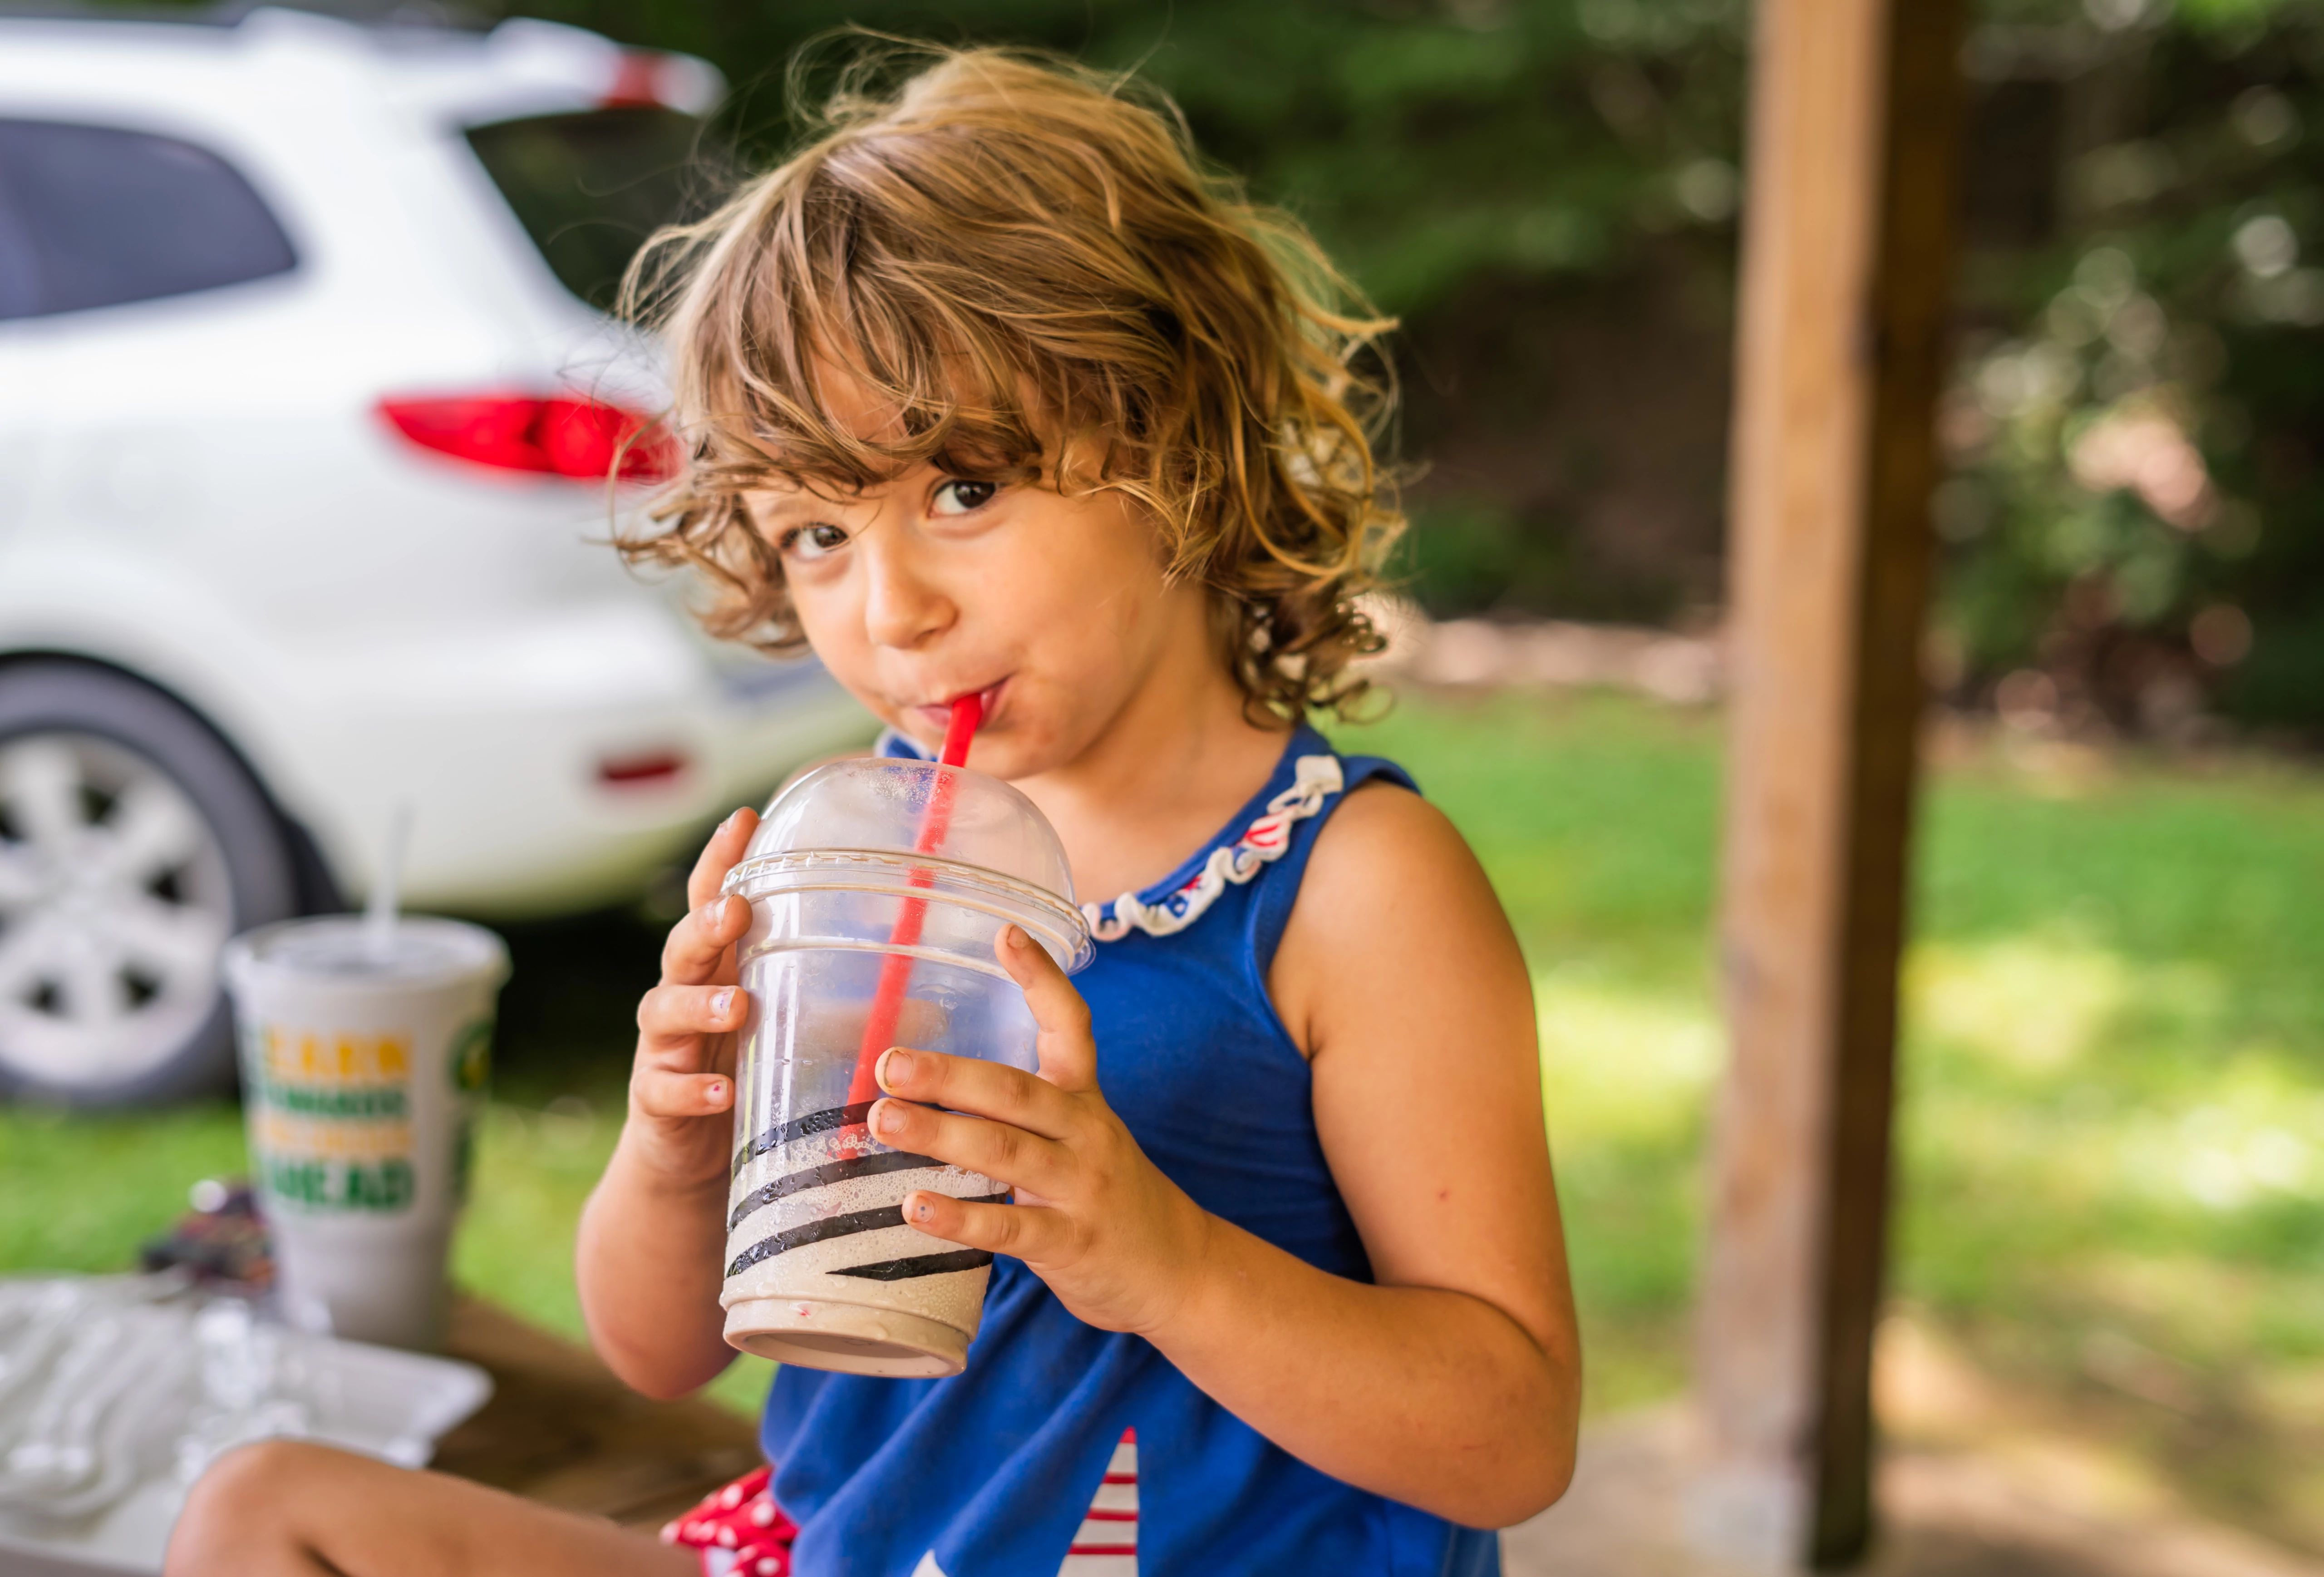 a young child drinks from a large cup while at a park